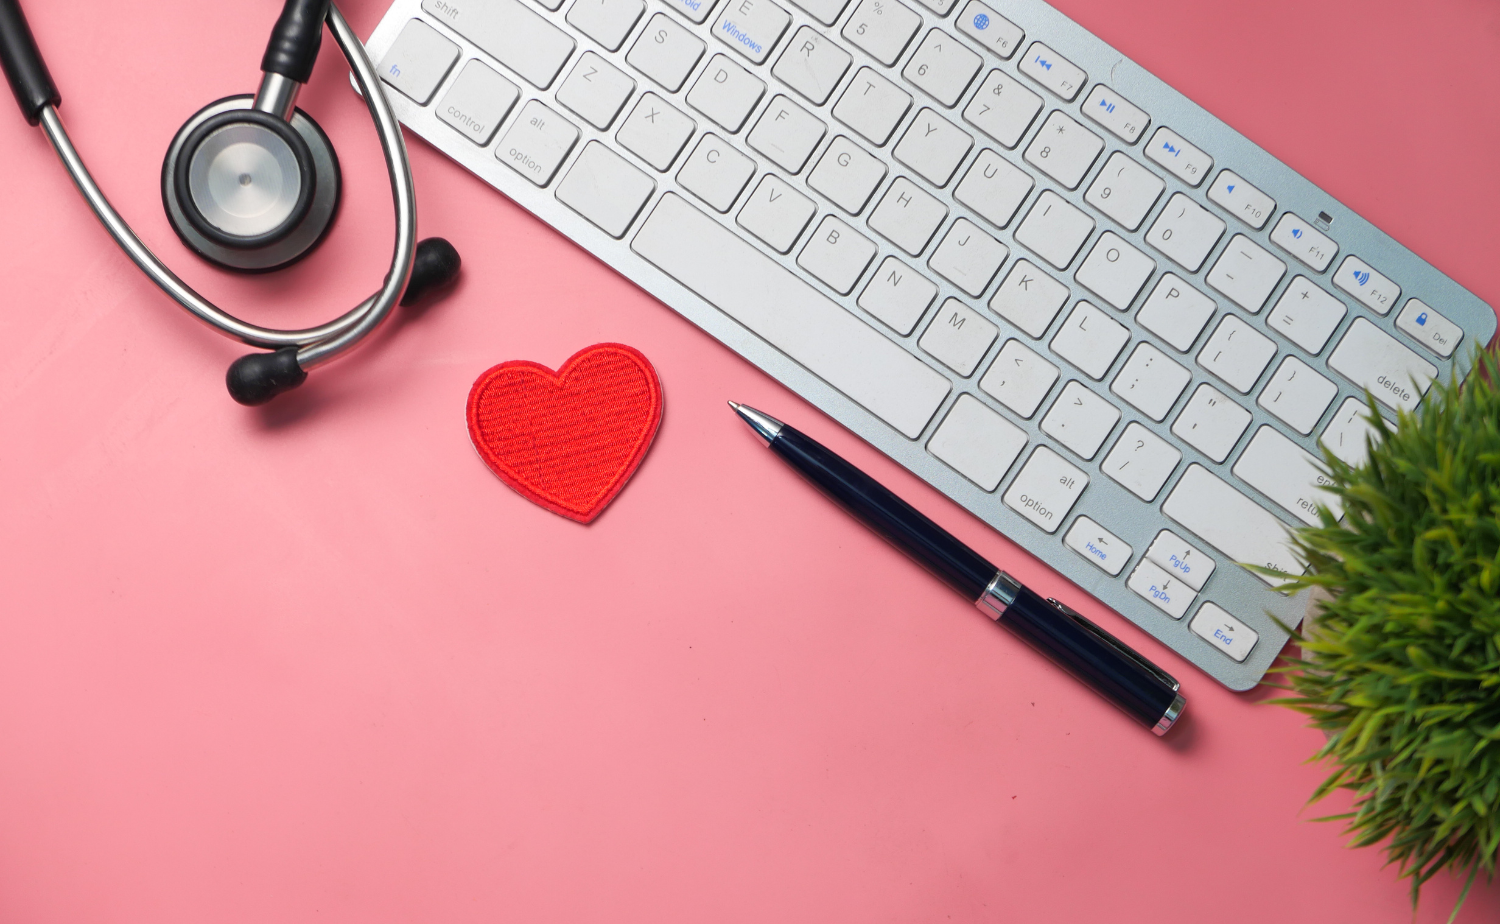 A stethoscope, a red heart, a pen, and a keyboard are arranged on a pink background, symbolizing the intersection of healthcare, technology, and compassion.